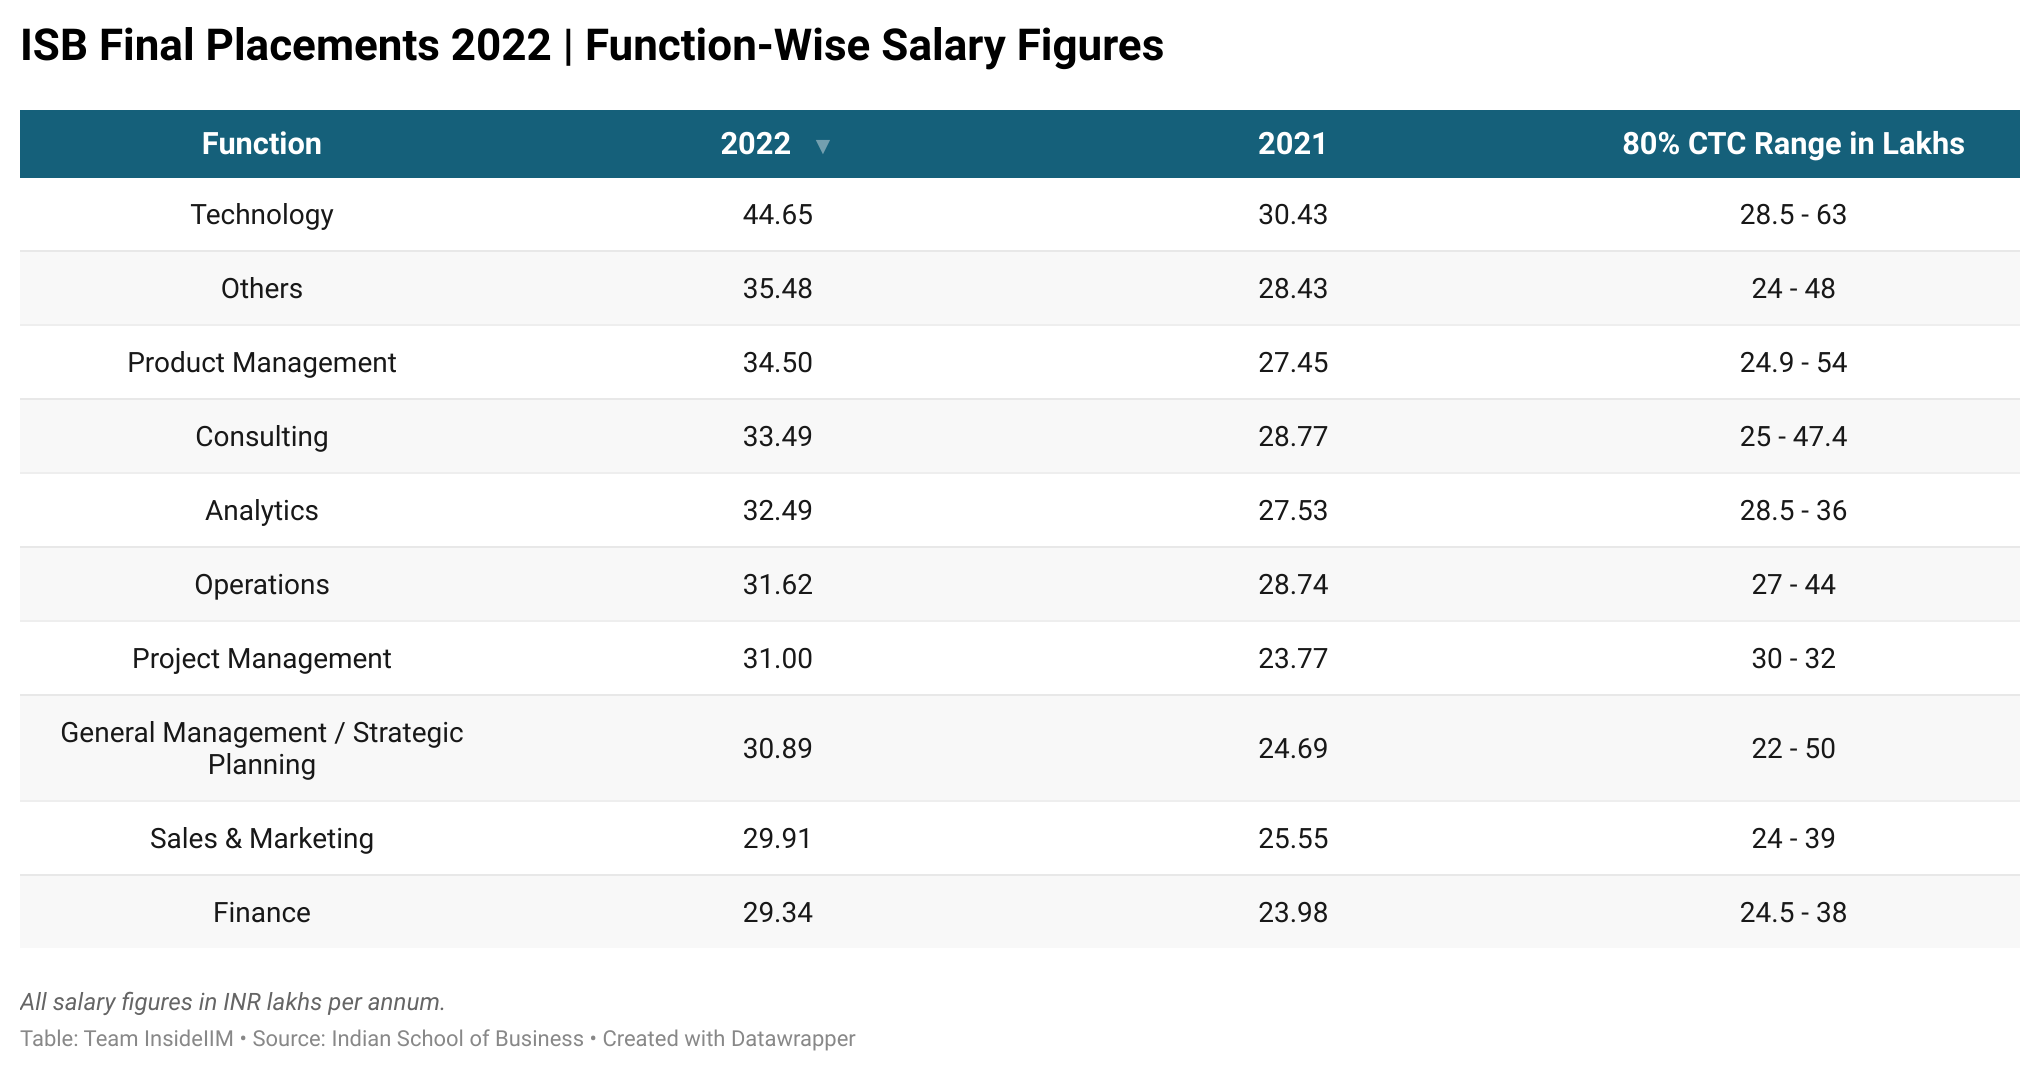 ISB Placements 2022 - Function-Wise Salary Figures